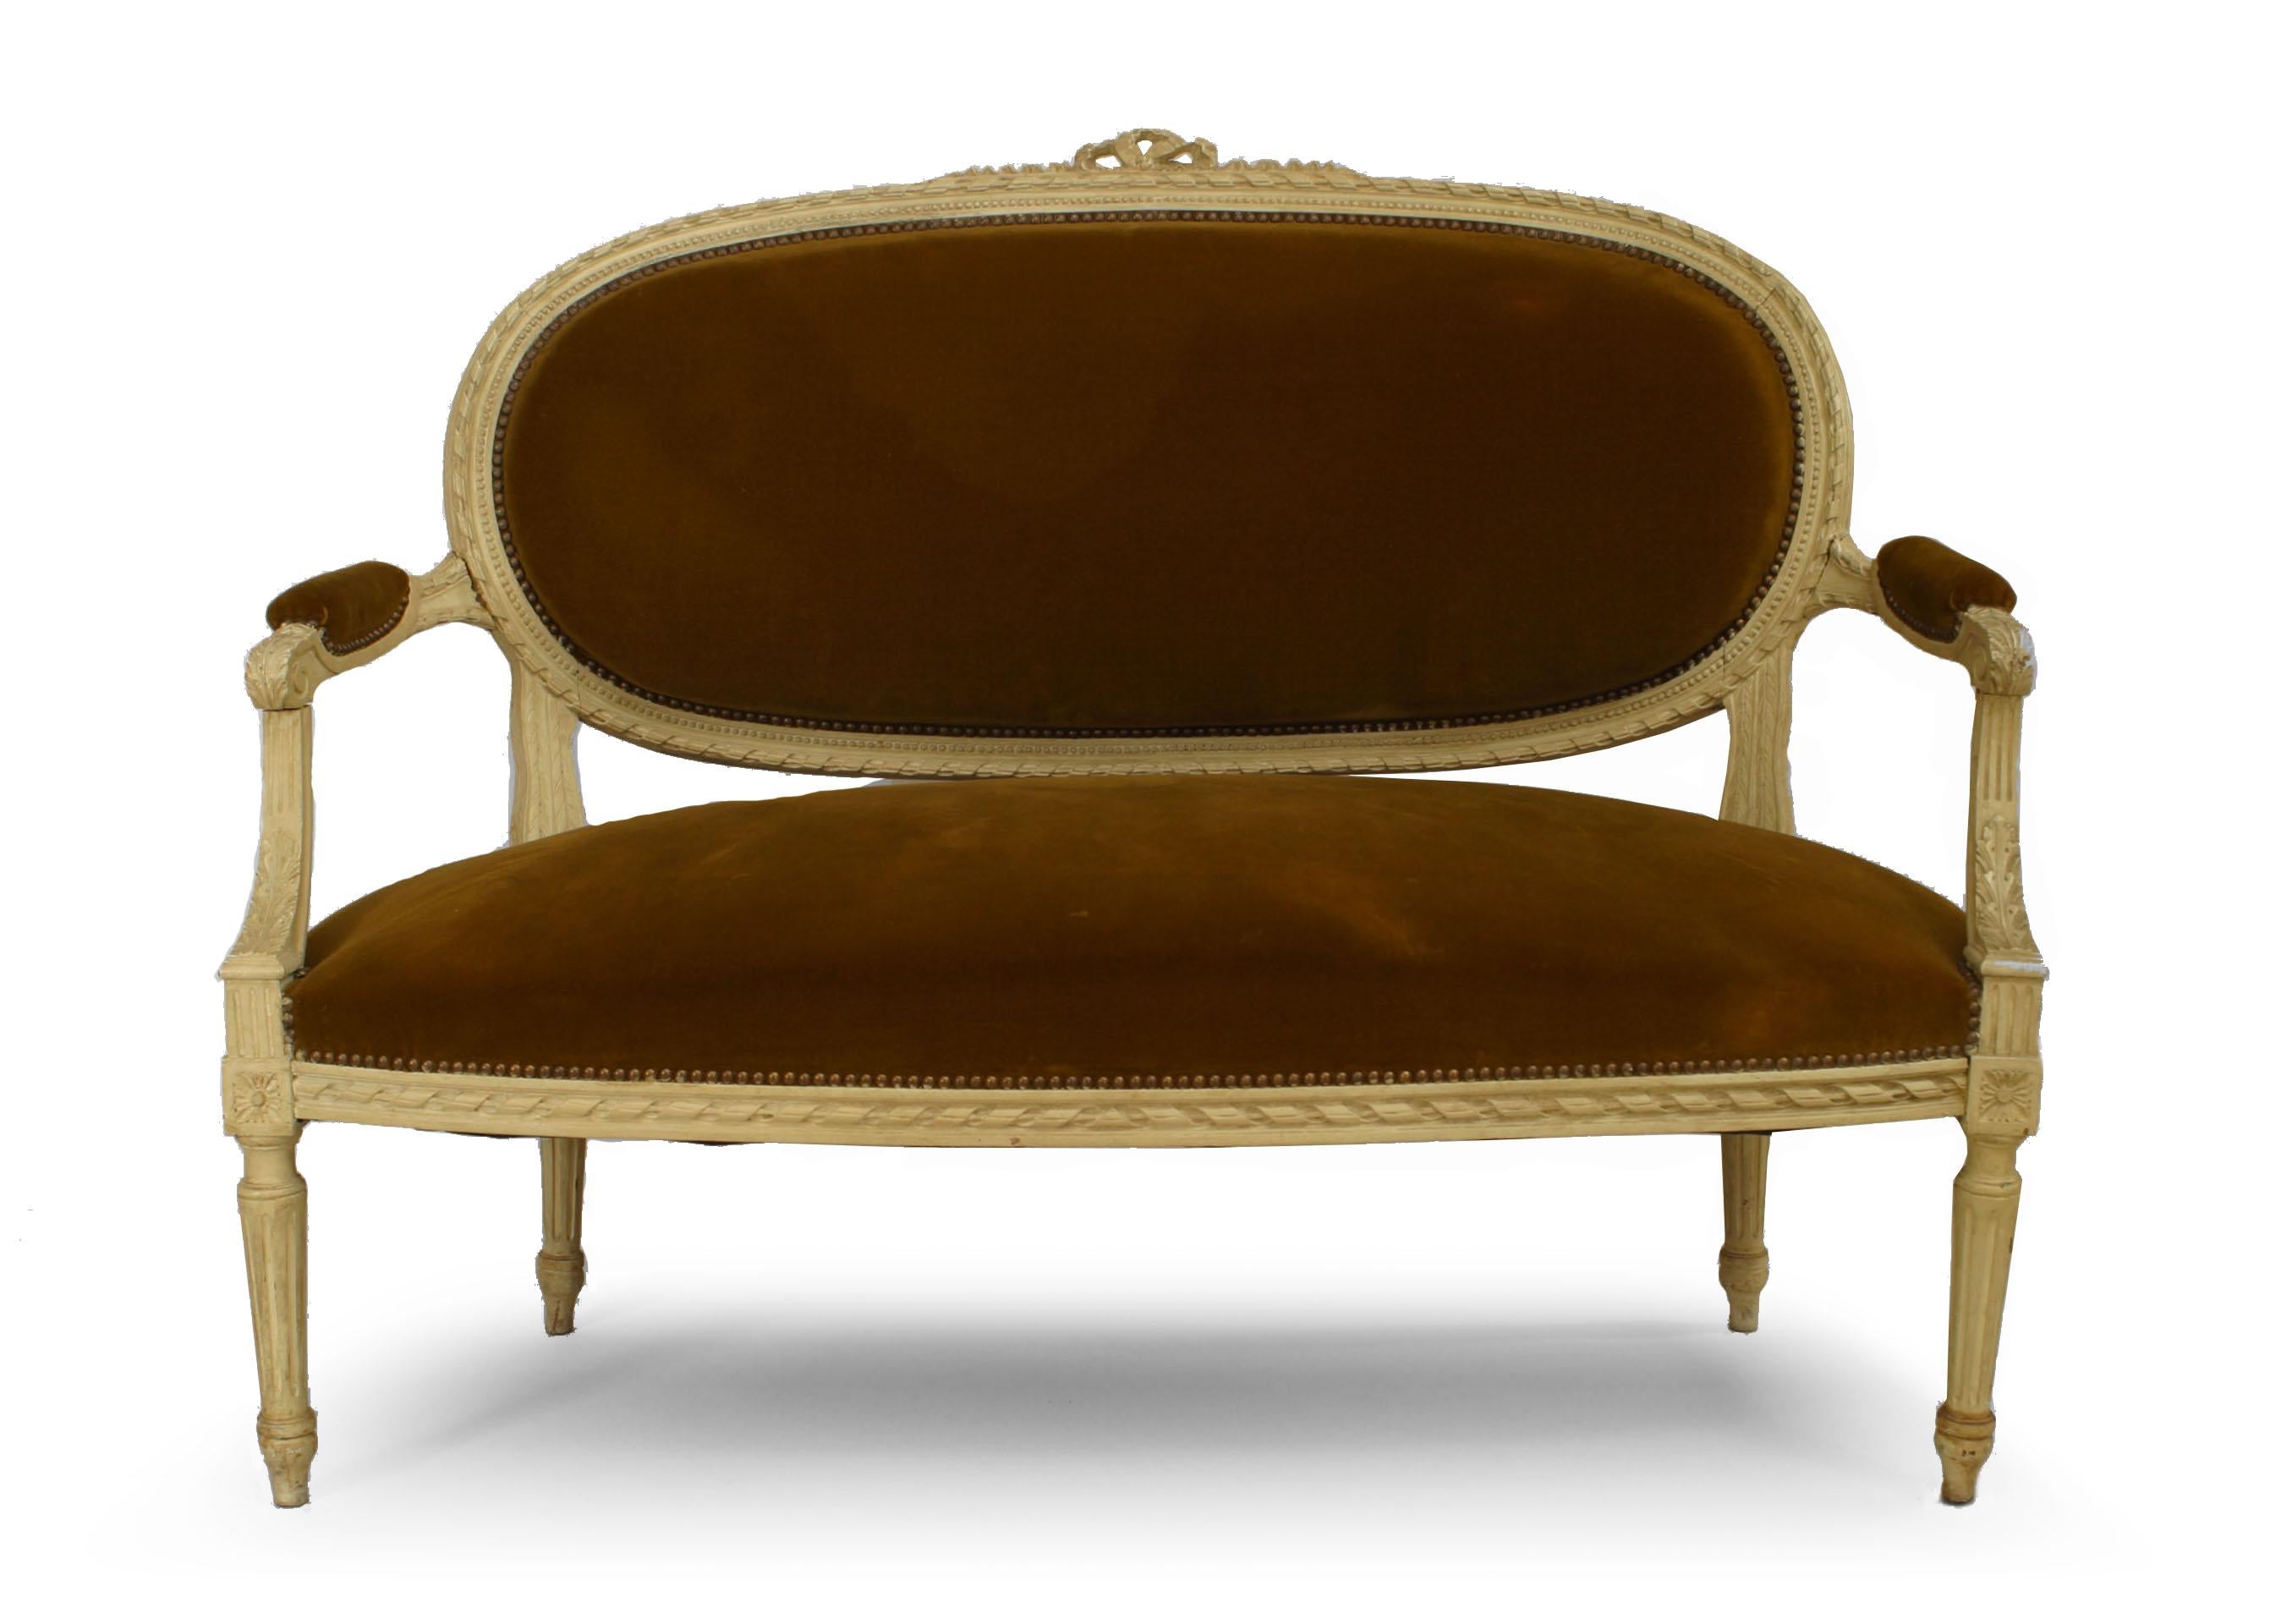 French Louis XVI style cream painted loveseat with bow knot carved back crest and velvet upholstered seat and back.